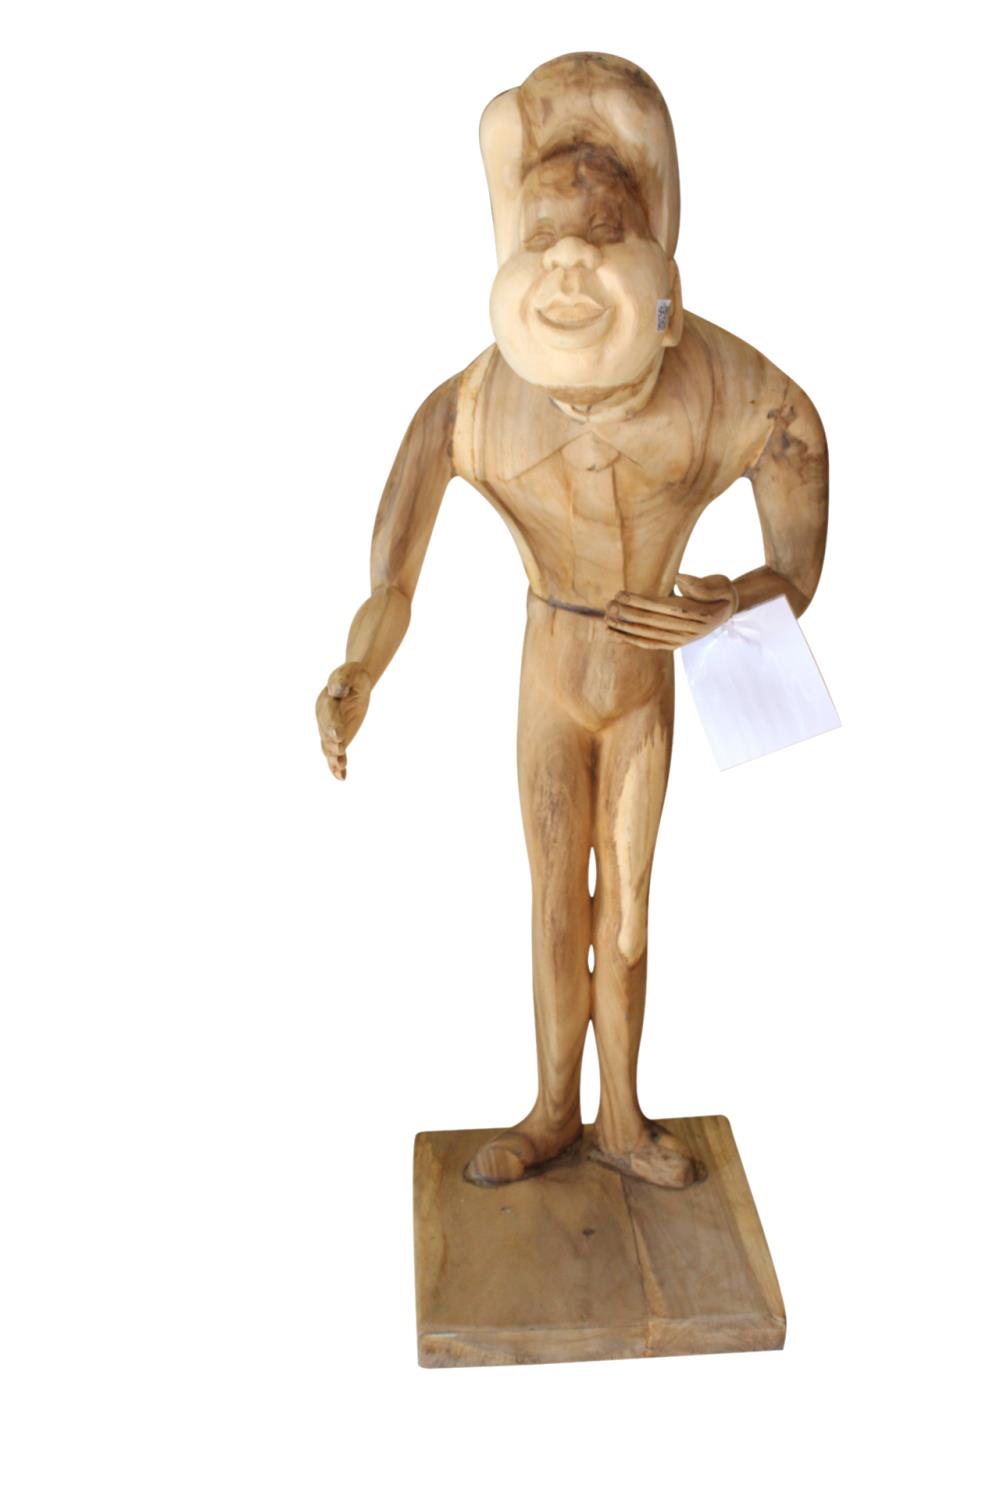 Carved wooden model of a man.